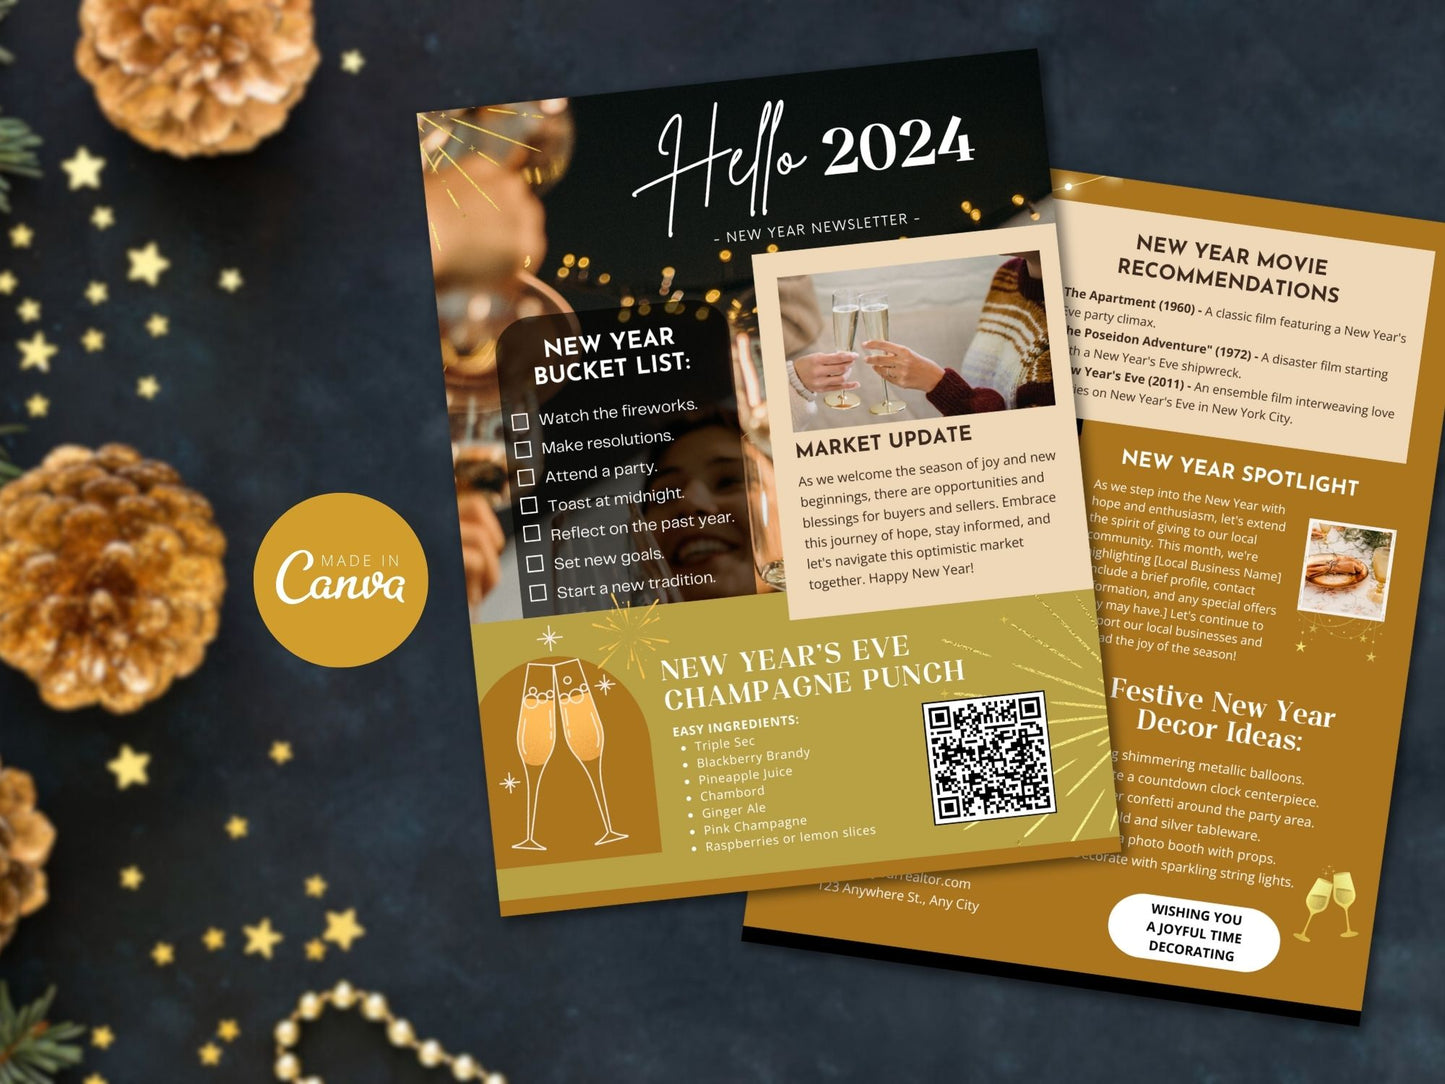 Real Estate New Year Newsletter 2024: Sharing Real Estate Insights and Celebrating the New Year with Clients and the Community